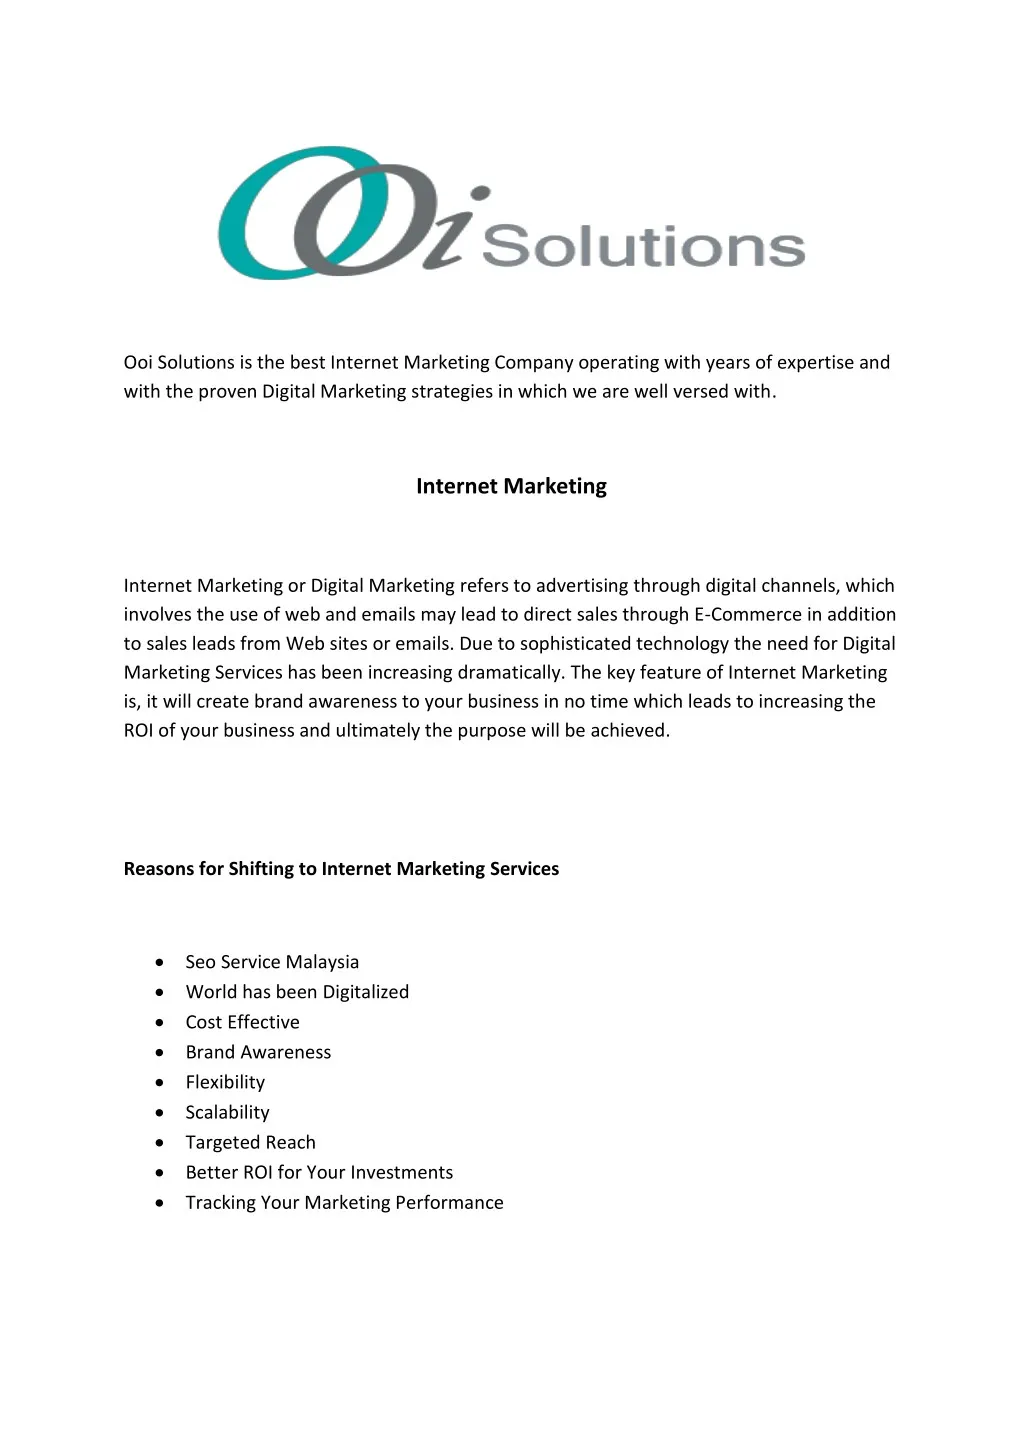 ooi solutions is the best internet marketing